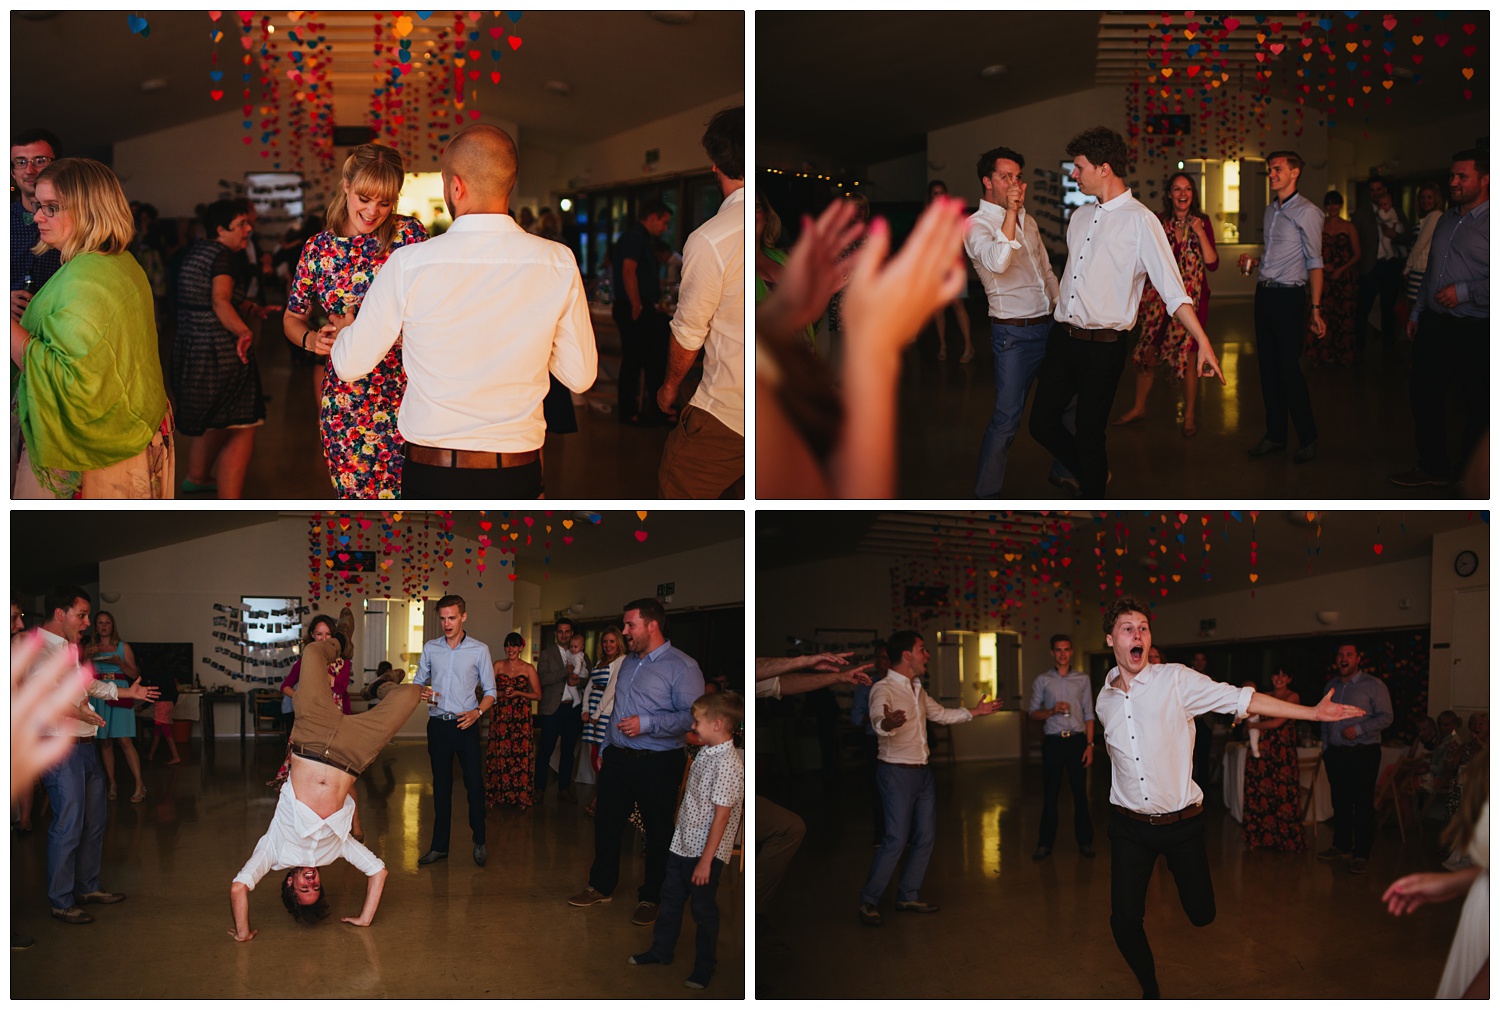 A man does a handstand on the dance floor at a wedding. There are strings of hearts hanging from the ceiling.